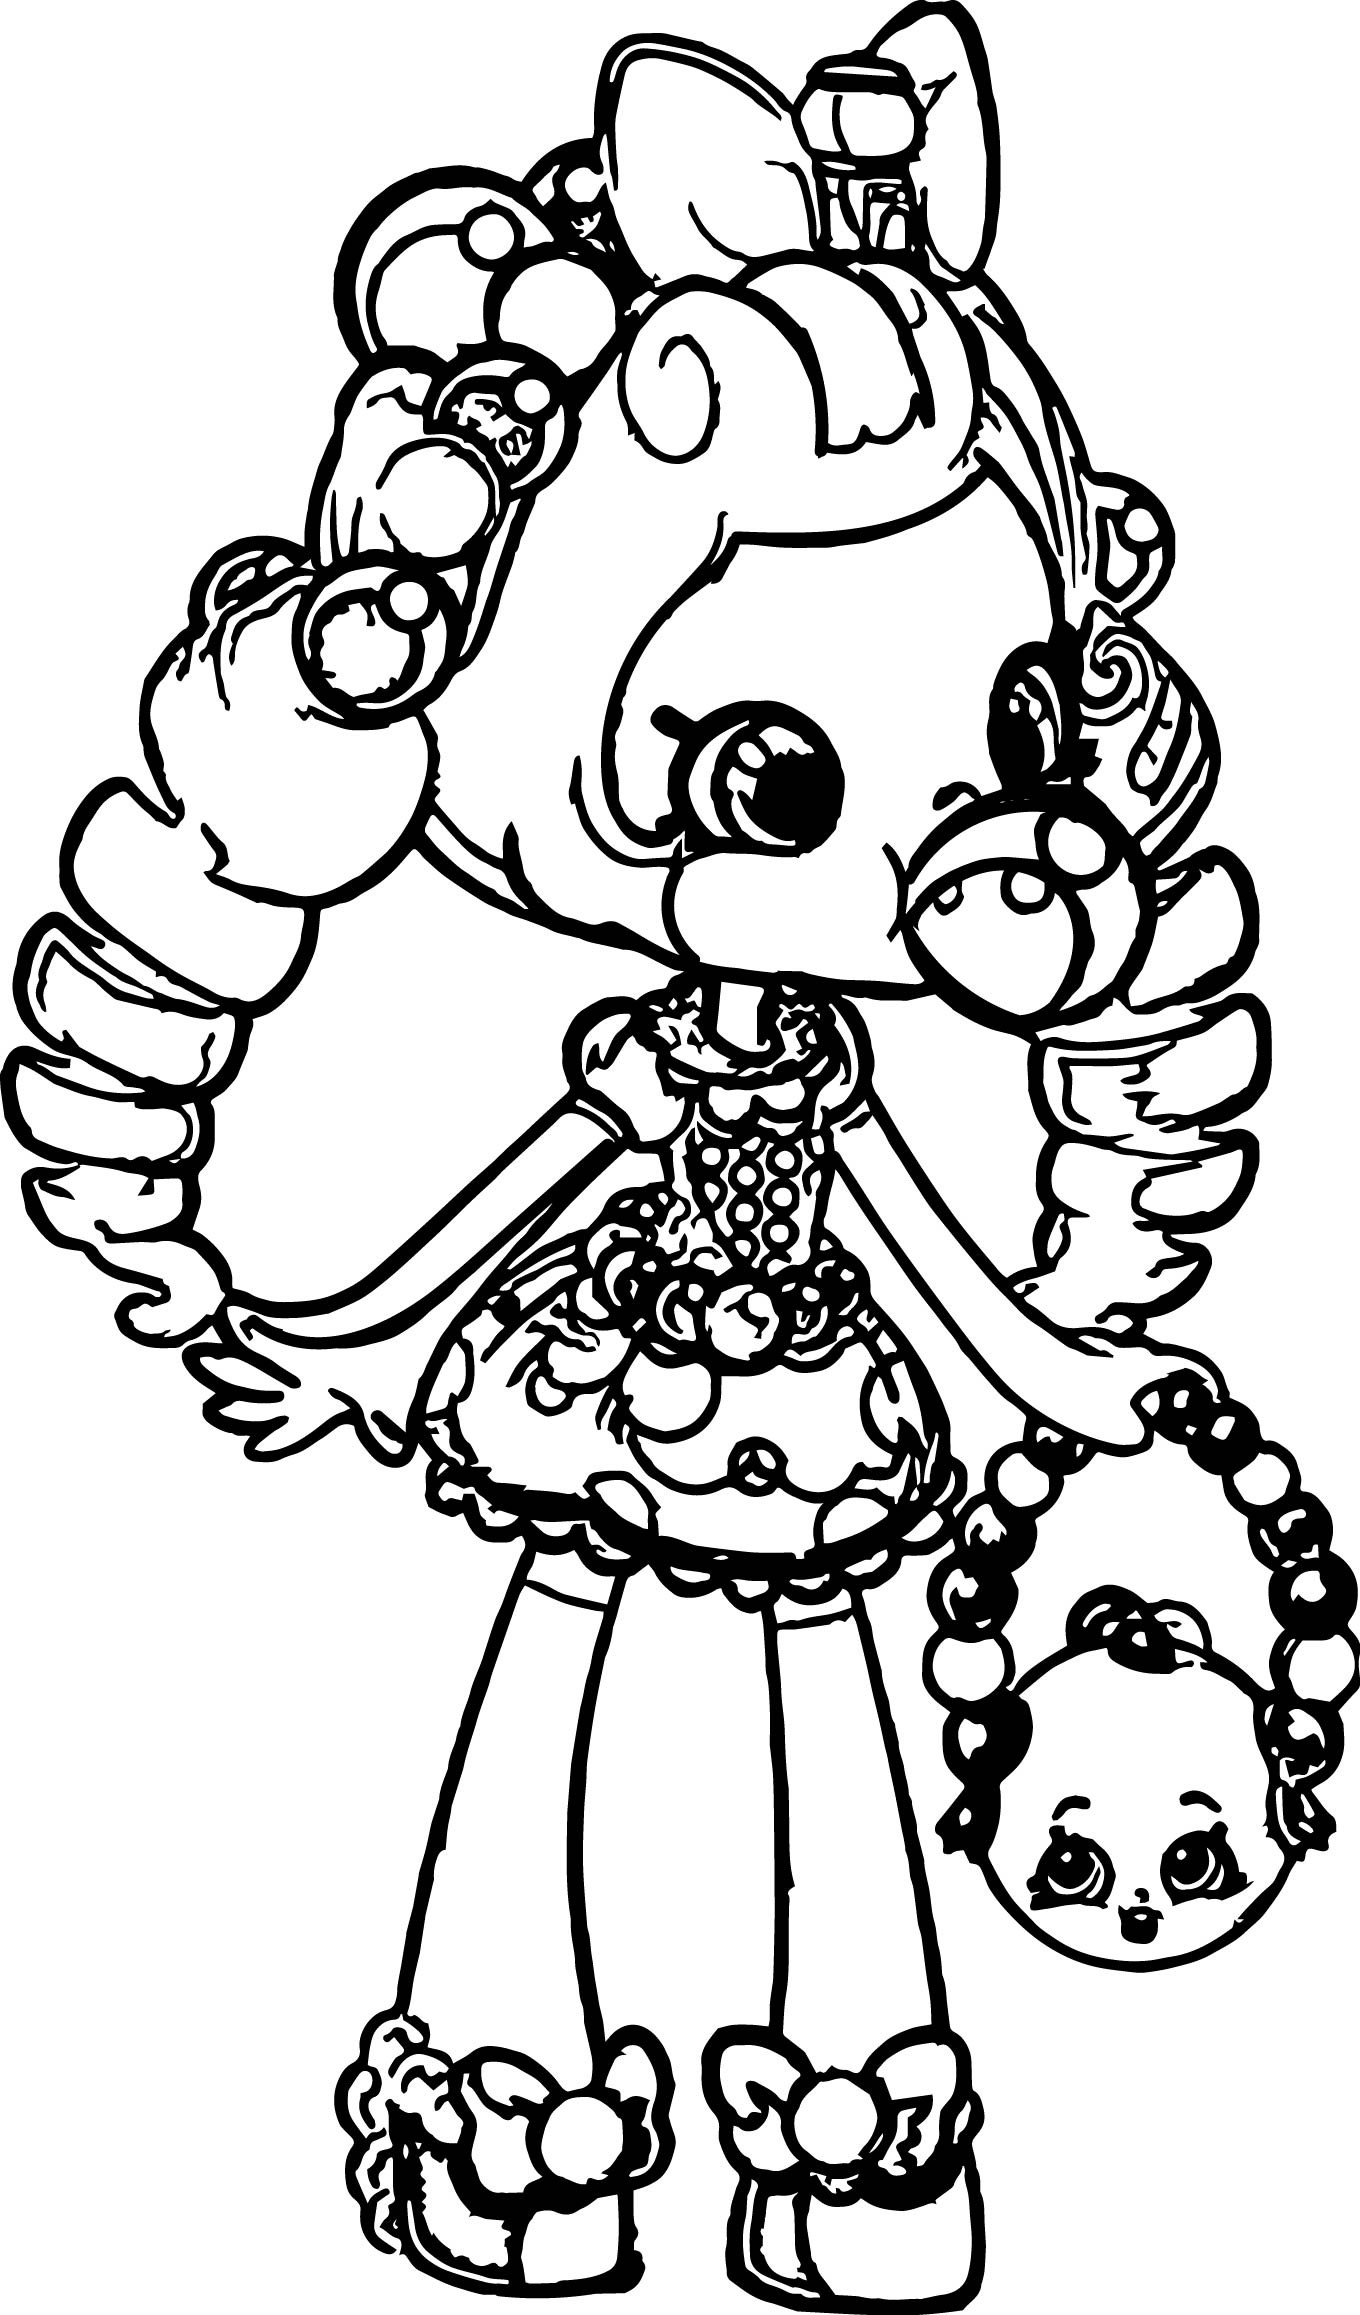 Coloring Pages For Girls Shopkins
 Shopkins Balloon Girl Coloring Page